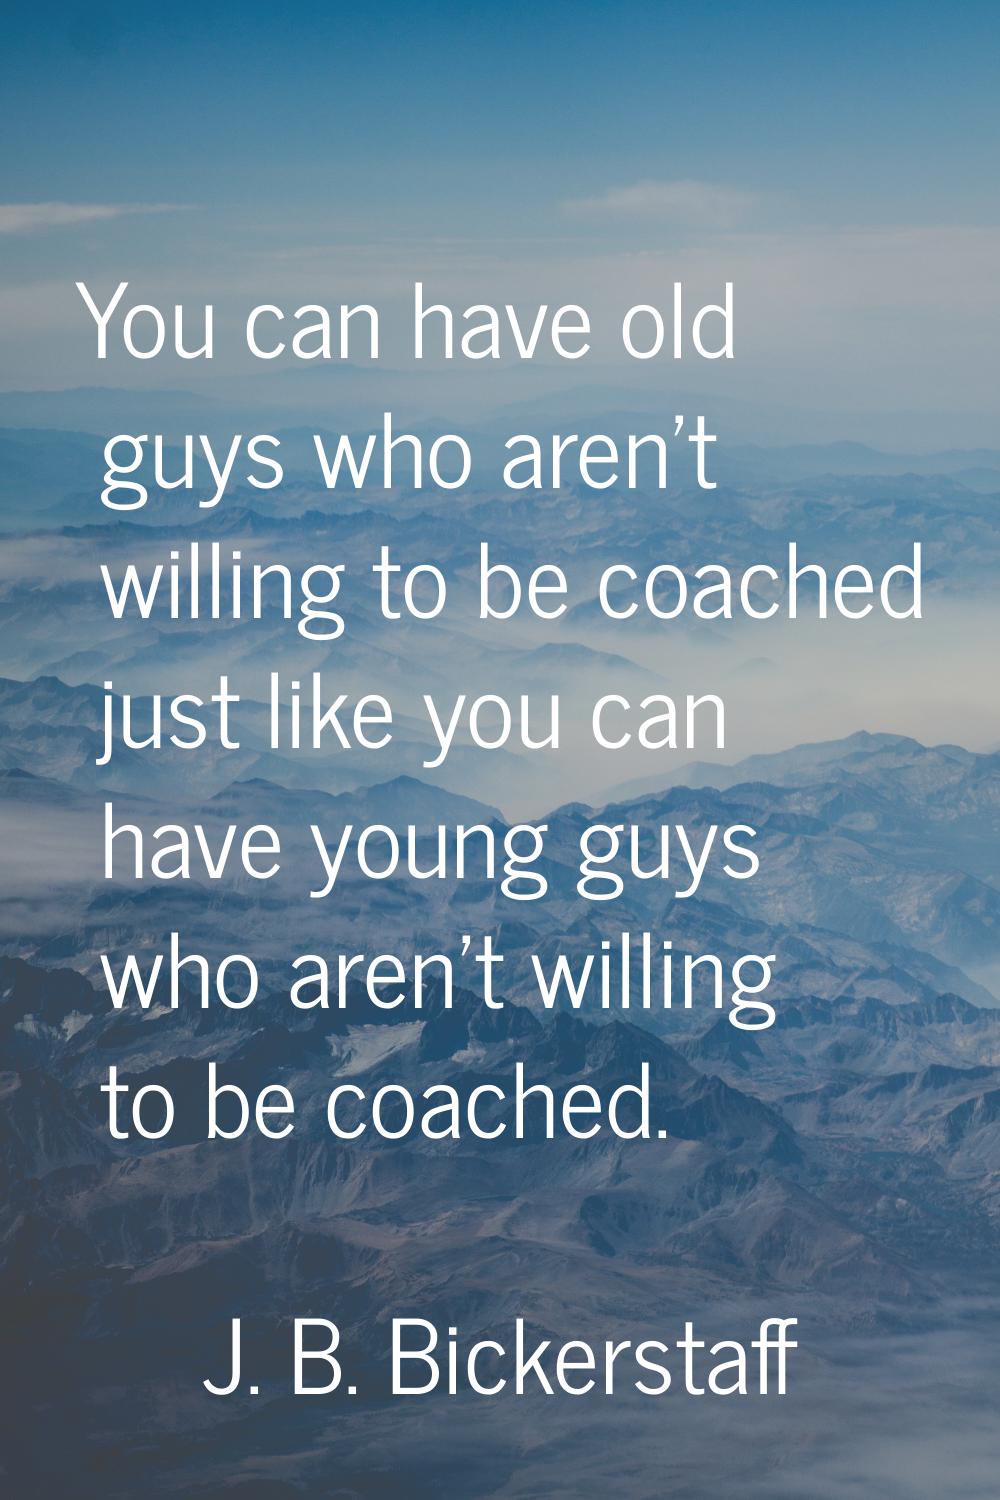 You can have old guys who aren't willing to be coached just like you can have young guys who aren't